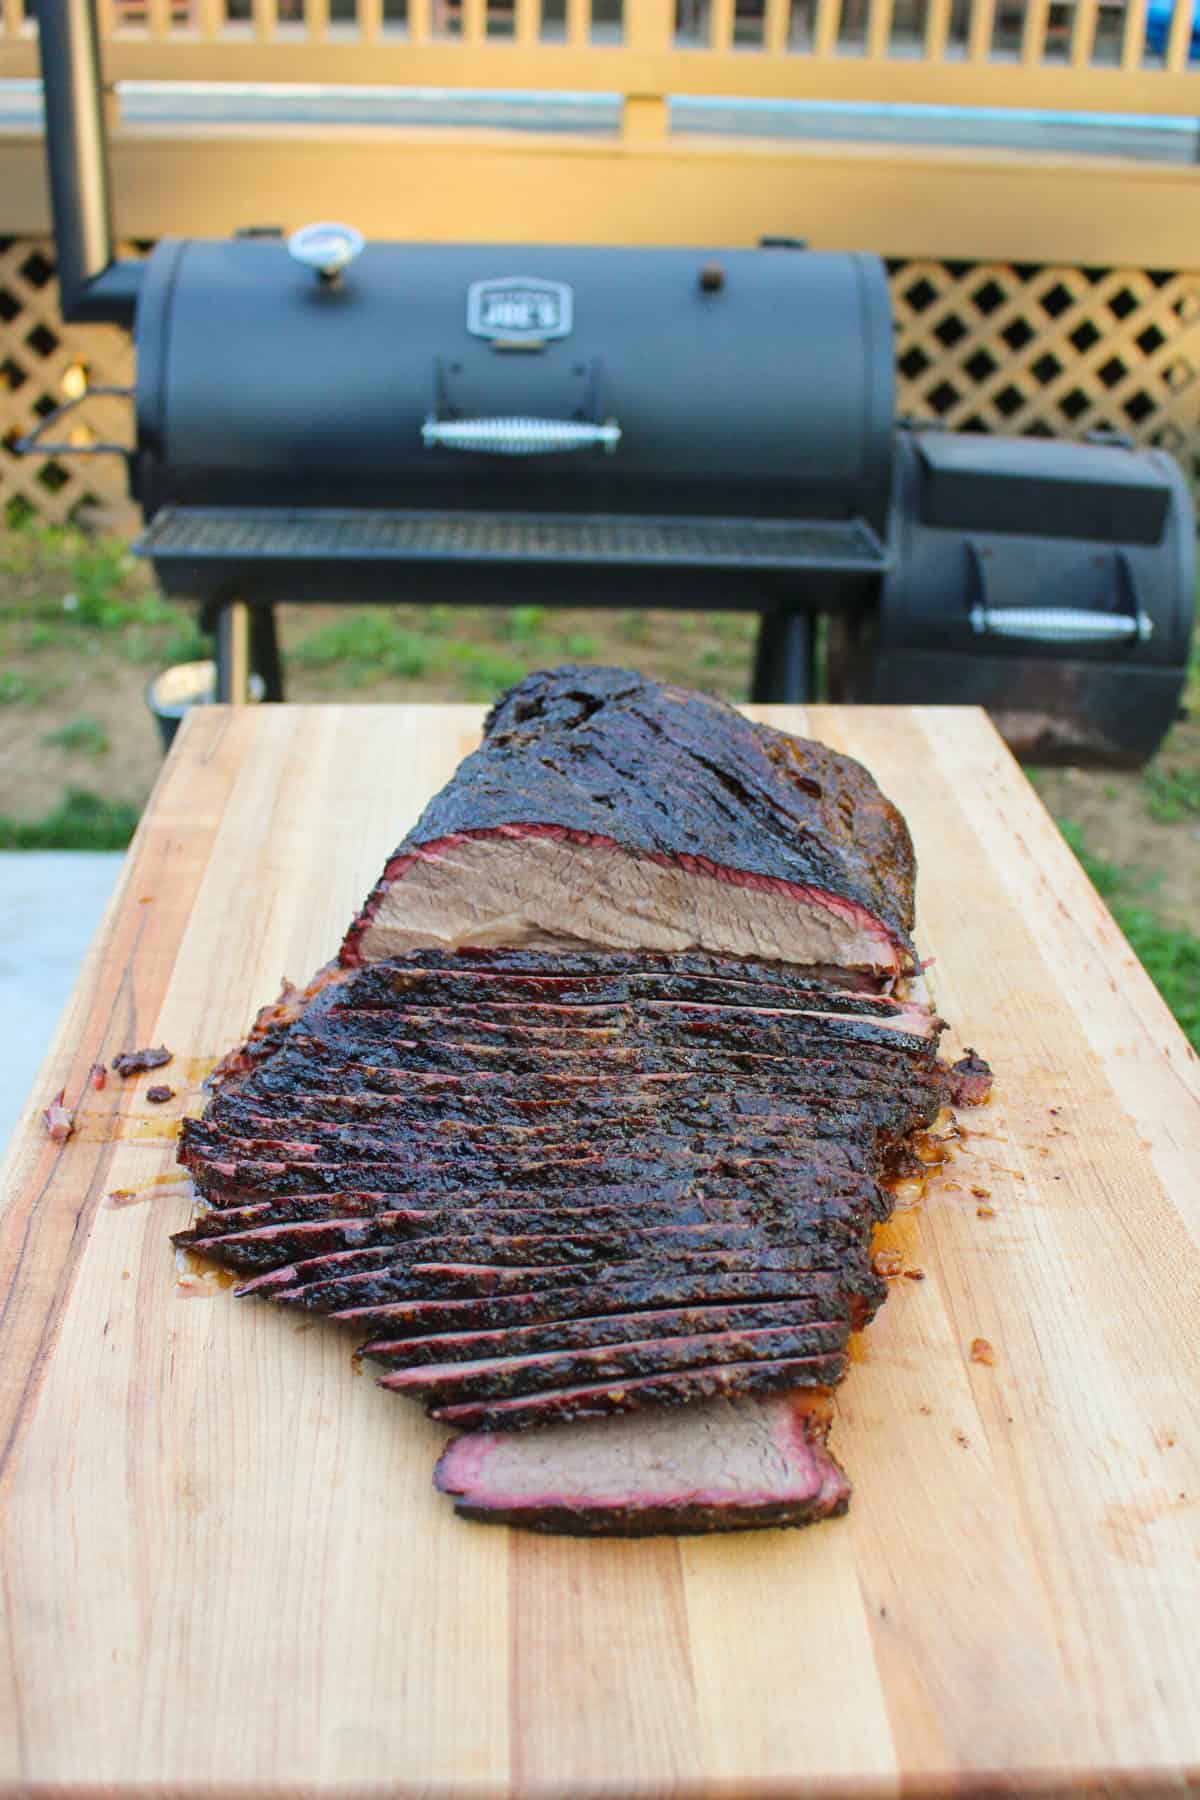 One final shot of the sliced brisket sitting on a cutting board in front of the smoker.